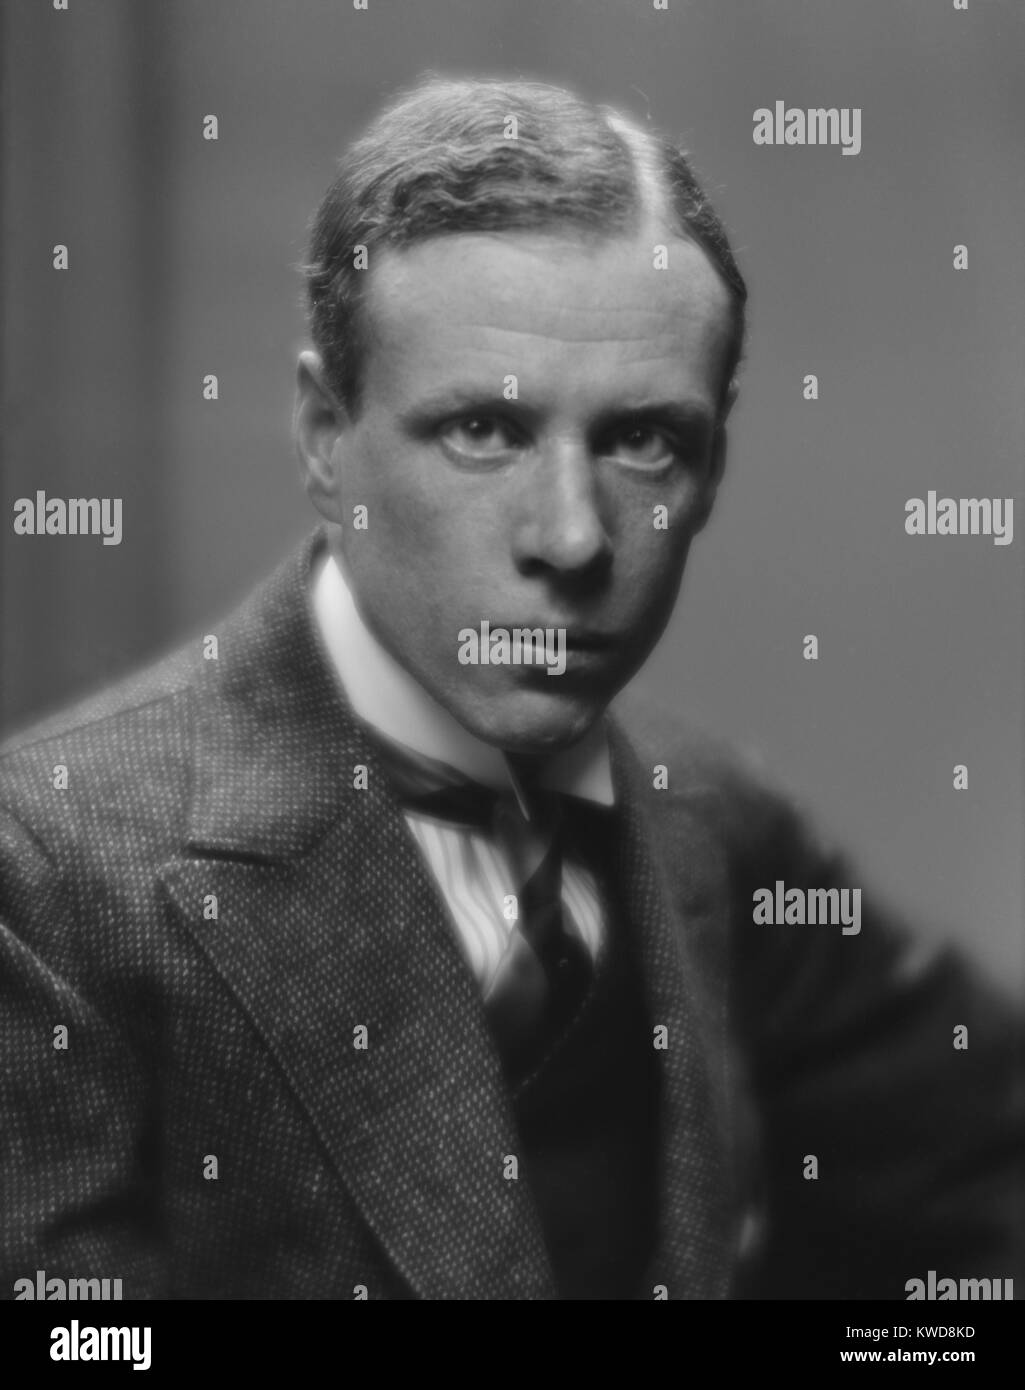 Lewis, Sinclair, whose realist novels of the 1920-30s were critical of American capitalism. Portrait by Arnold Genthe Arnold, Mar. 7, 1914. He was the first writer from the United States to receive the Nobel Prize in Literature in 1930 (BSLOC 2016 7 8) Stock Photo